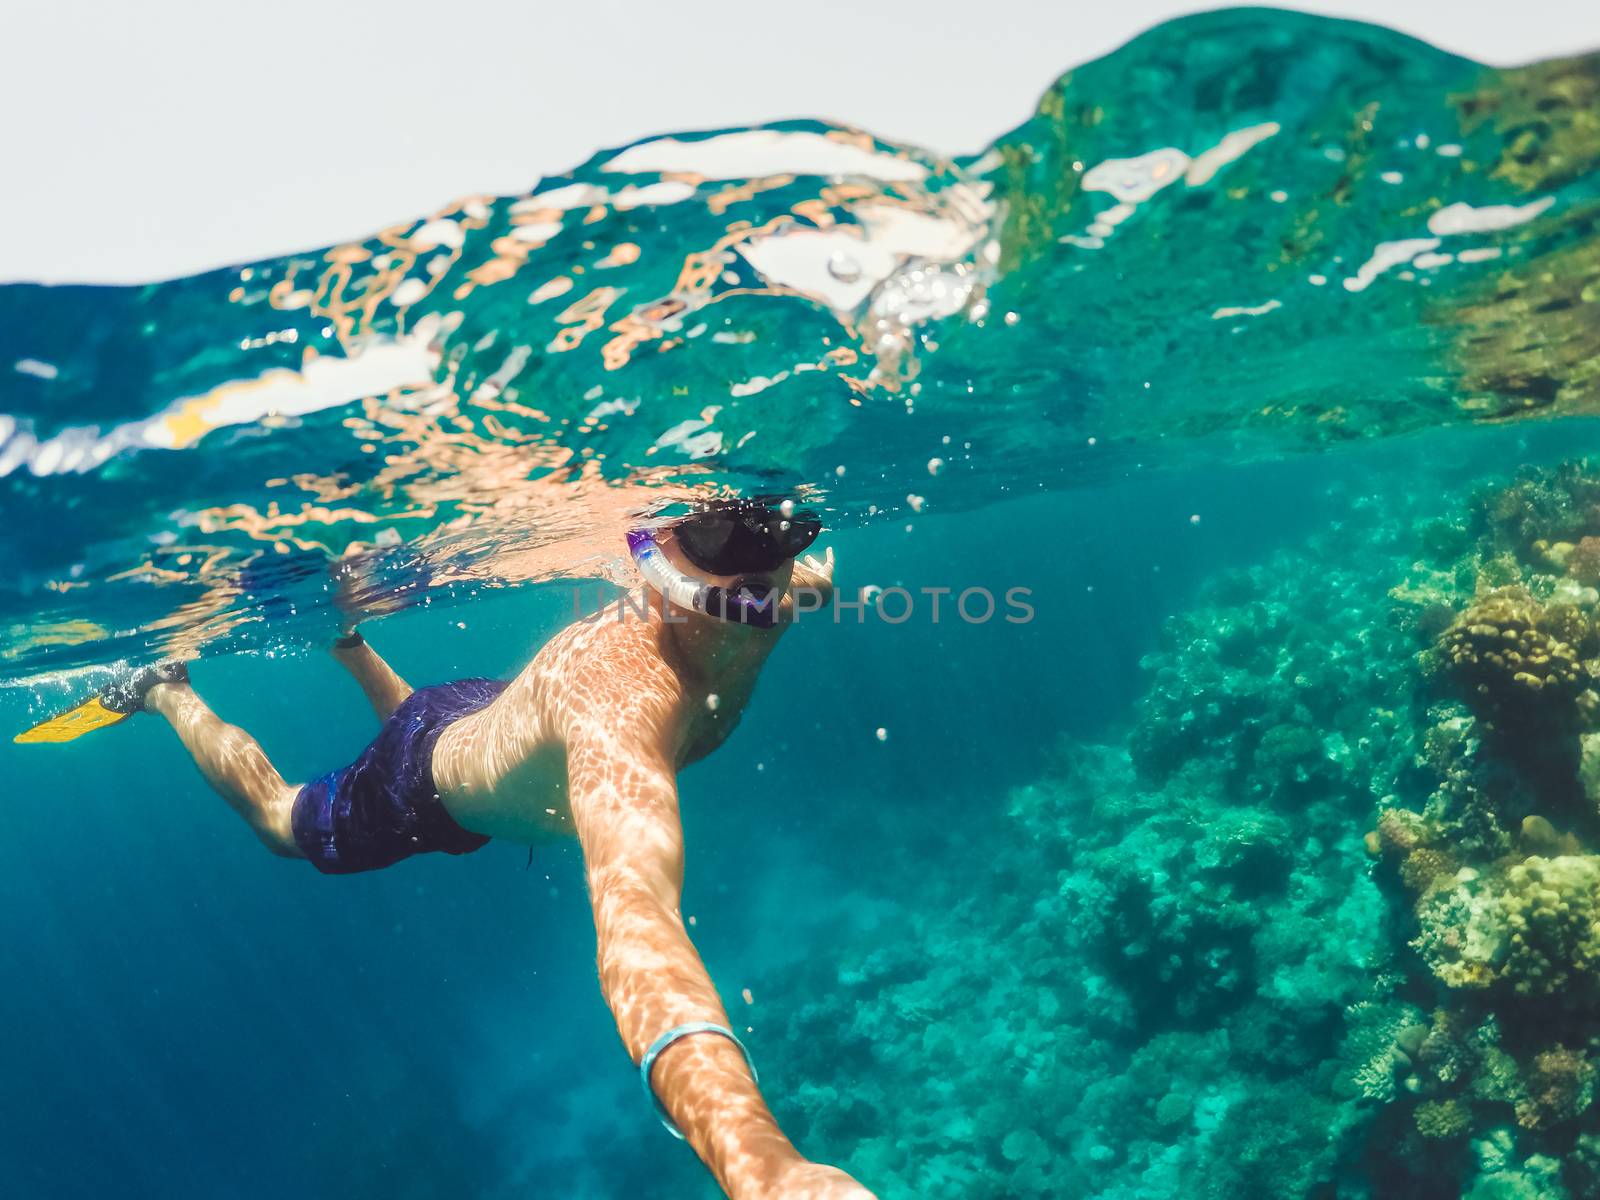 Underwater and surface split view in the tropics paradise with snorkeling man, fish and coral reef, under and above waterline, beautiful view on tropical sea. Egypt. Holiday snorkeling vacation concept